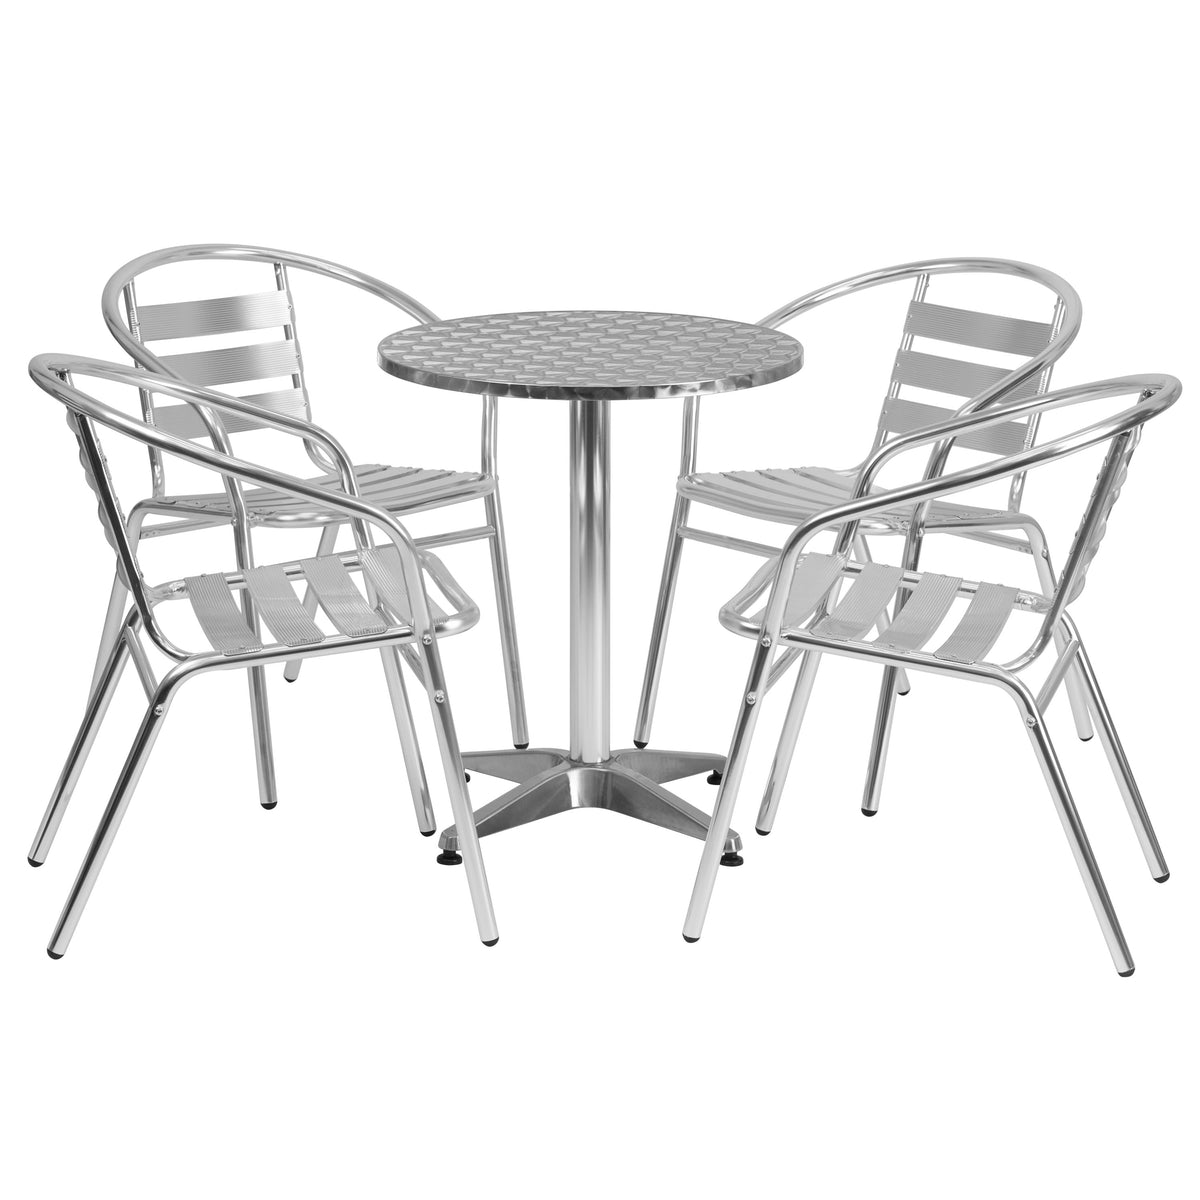 23.5inch Round Aluminum Indoor-Outdoor Table Set with 4 Slat Back Chairs